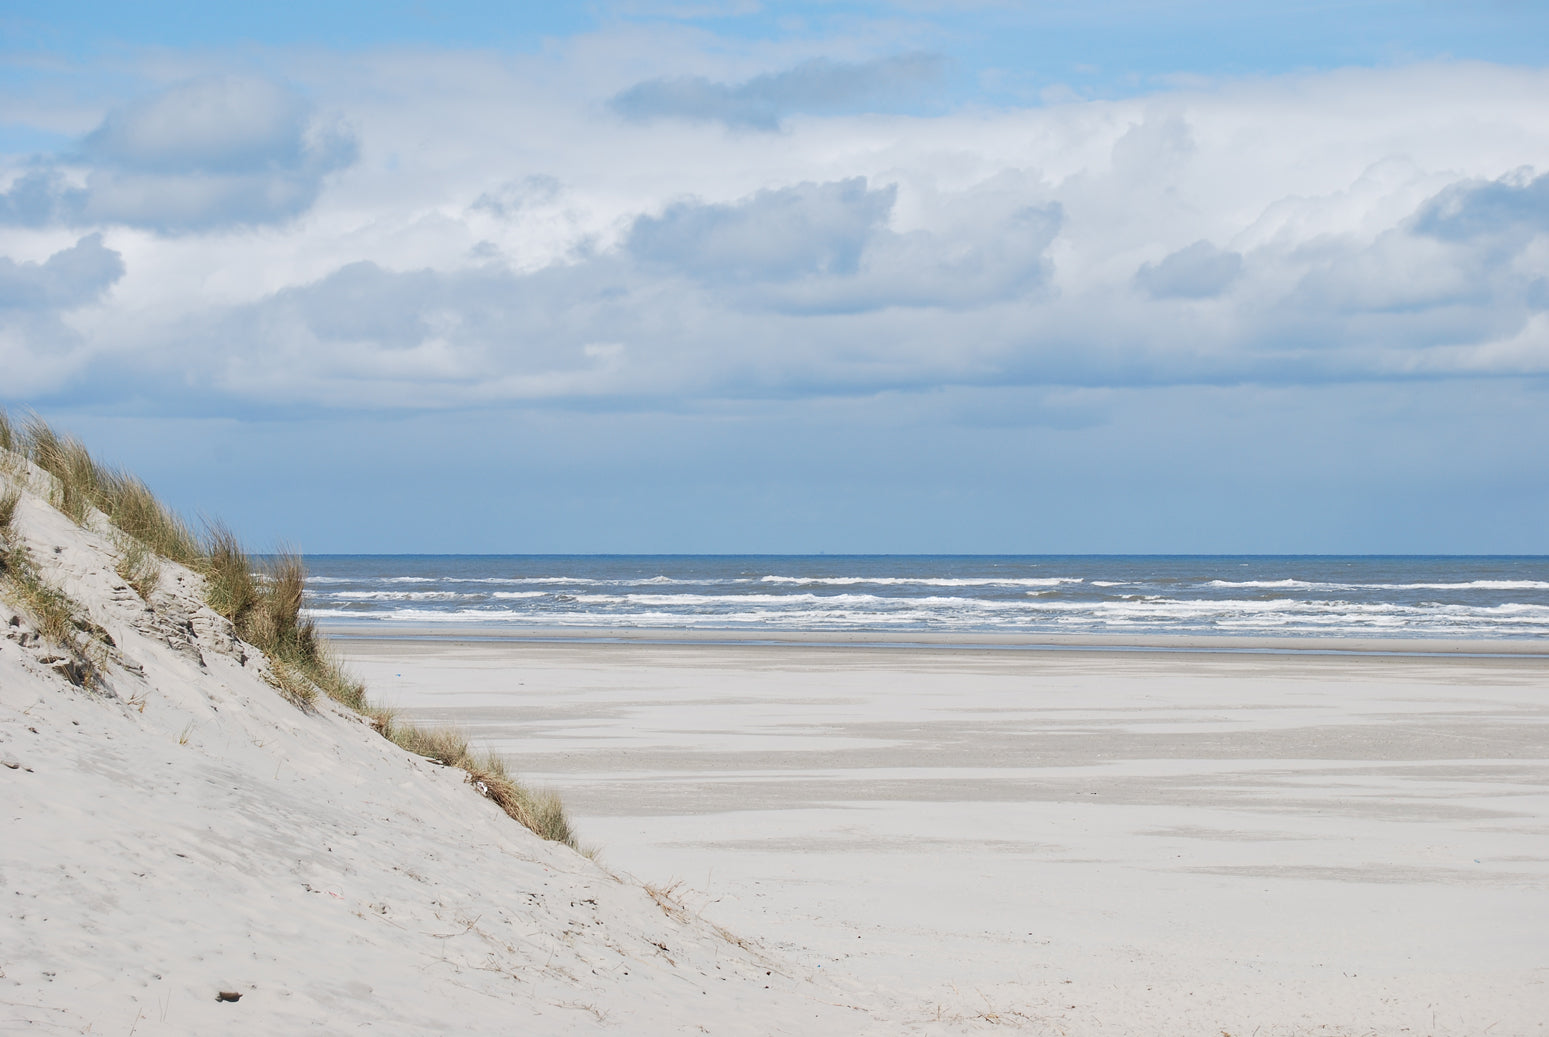 The dunes and the North Sea. The place where Alaia Surf started